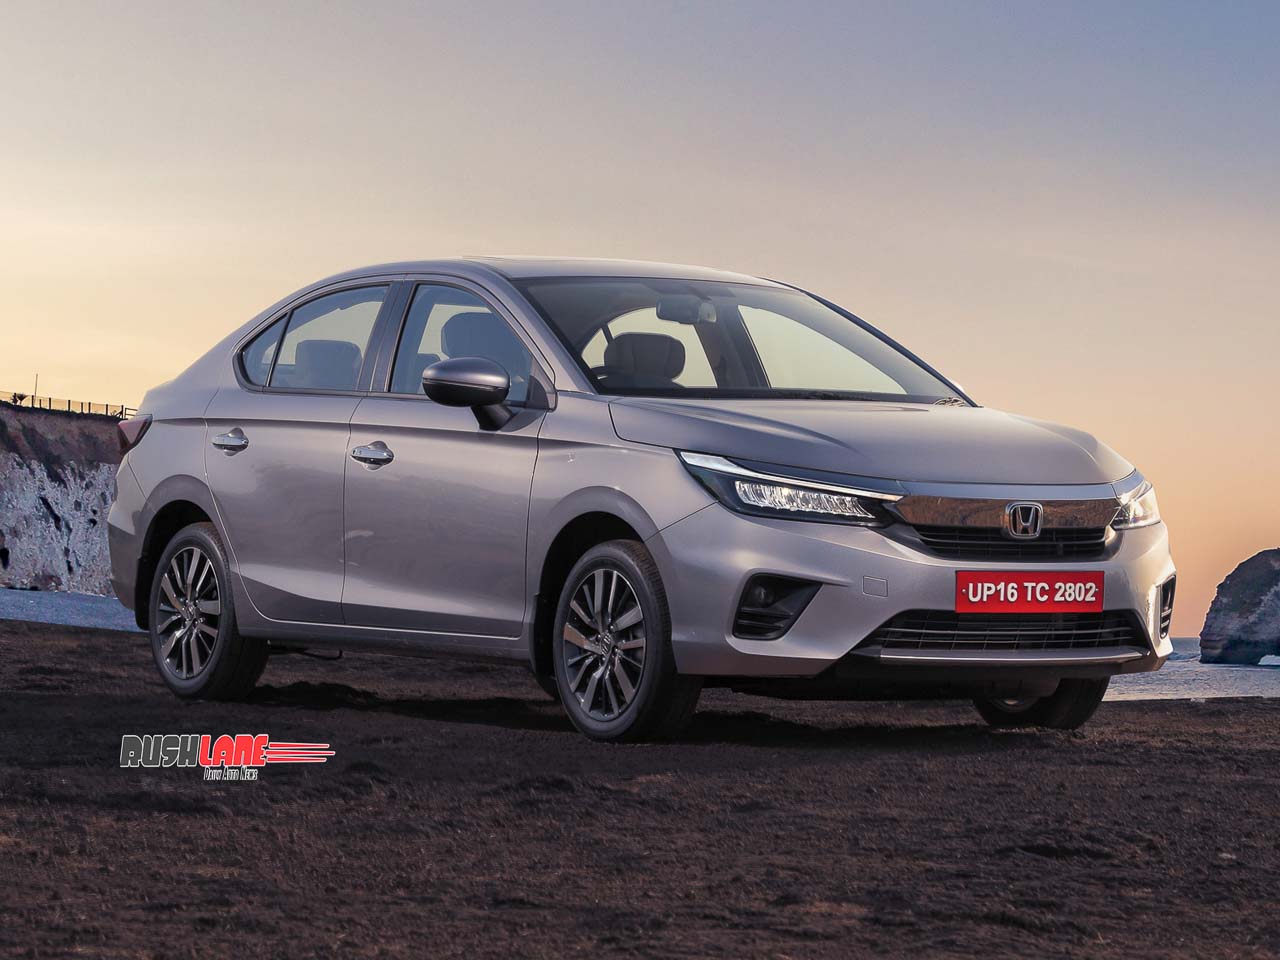 2020 Honda City Exports In Plans As Part Of Make In India Policy